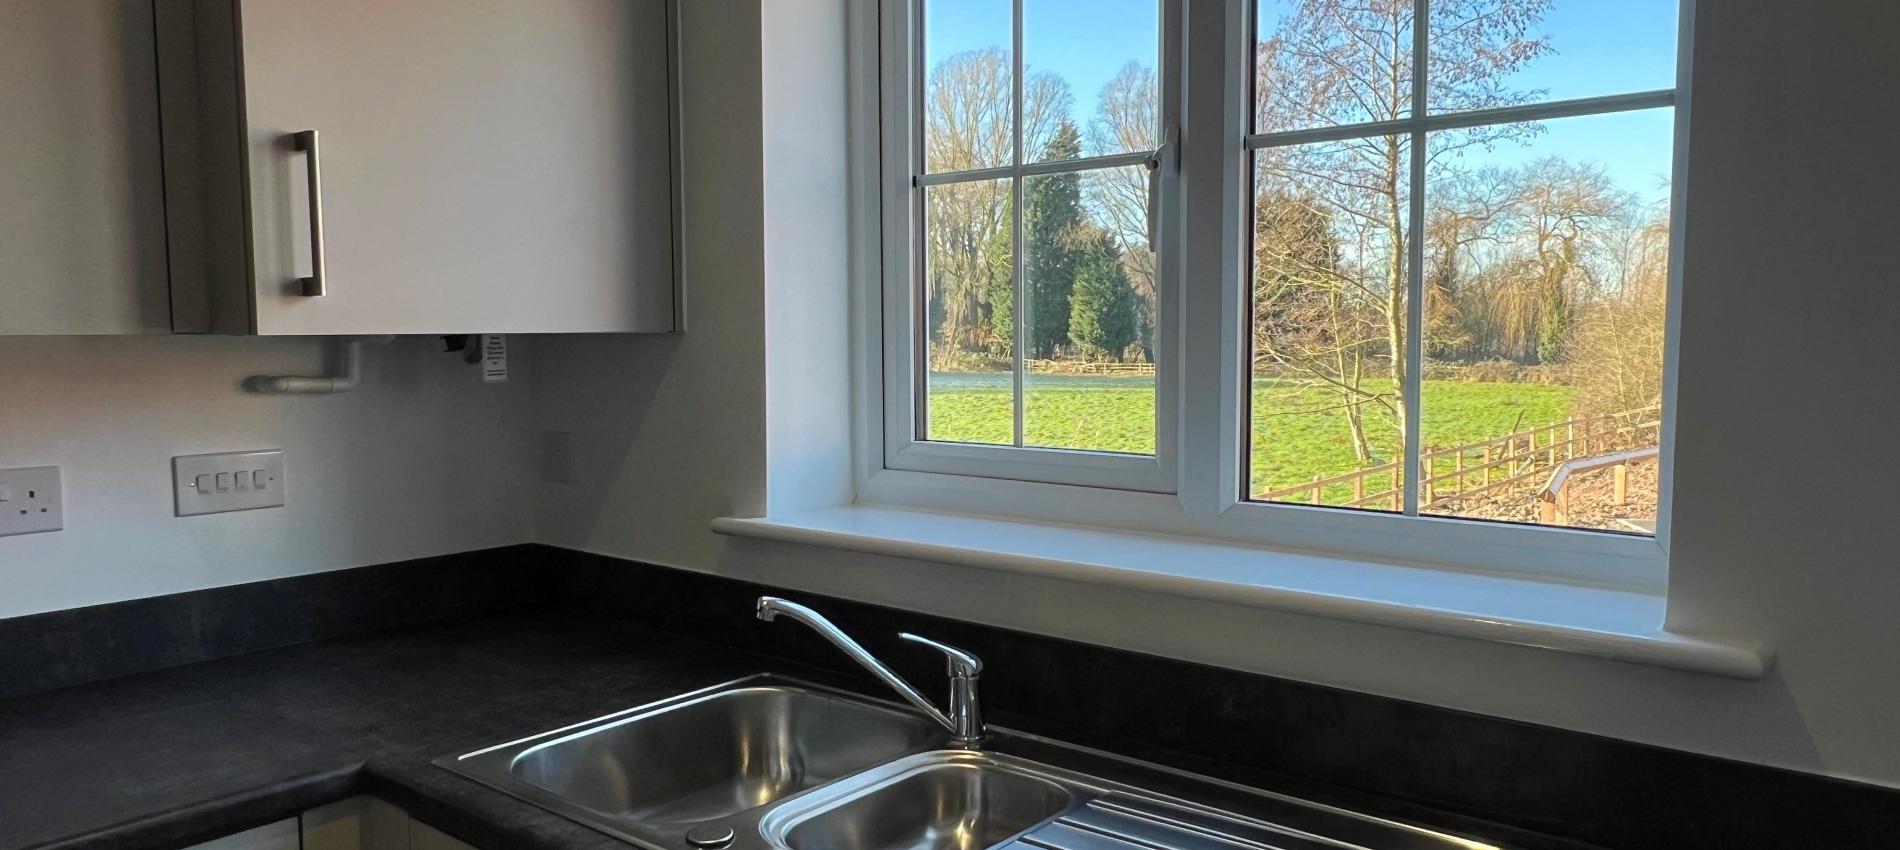 Kitchen View in The Ivy, Kingmakers View